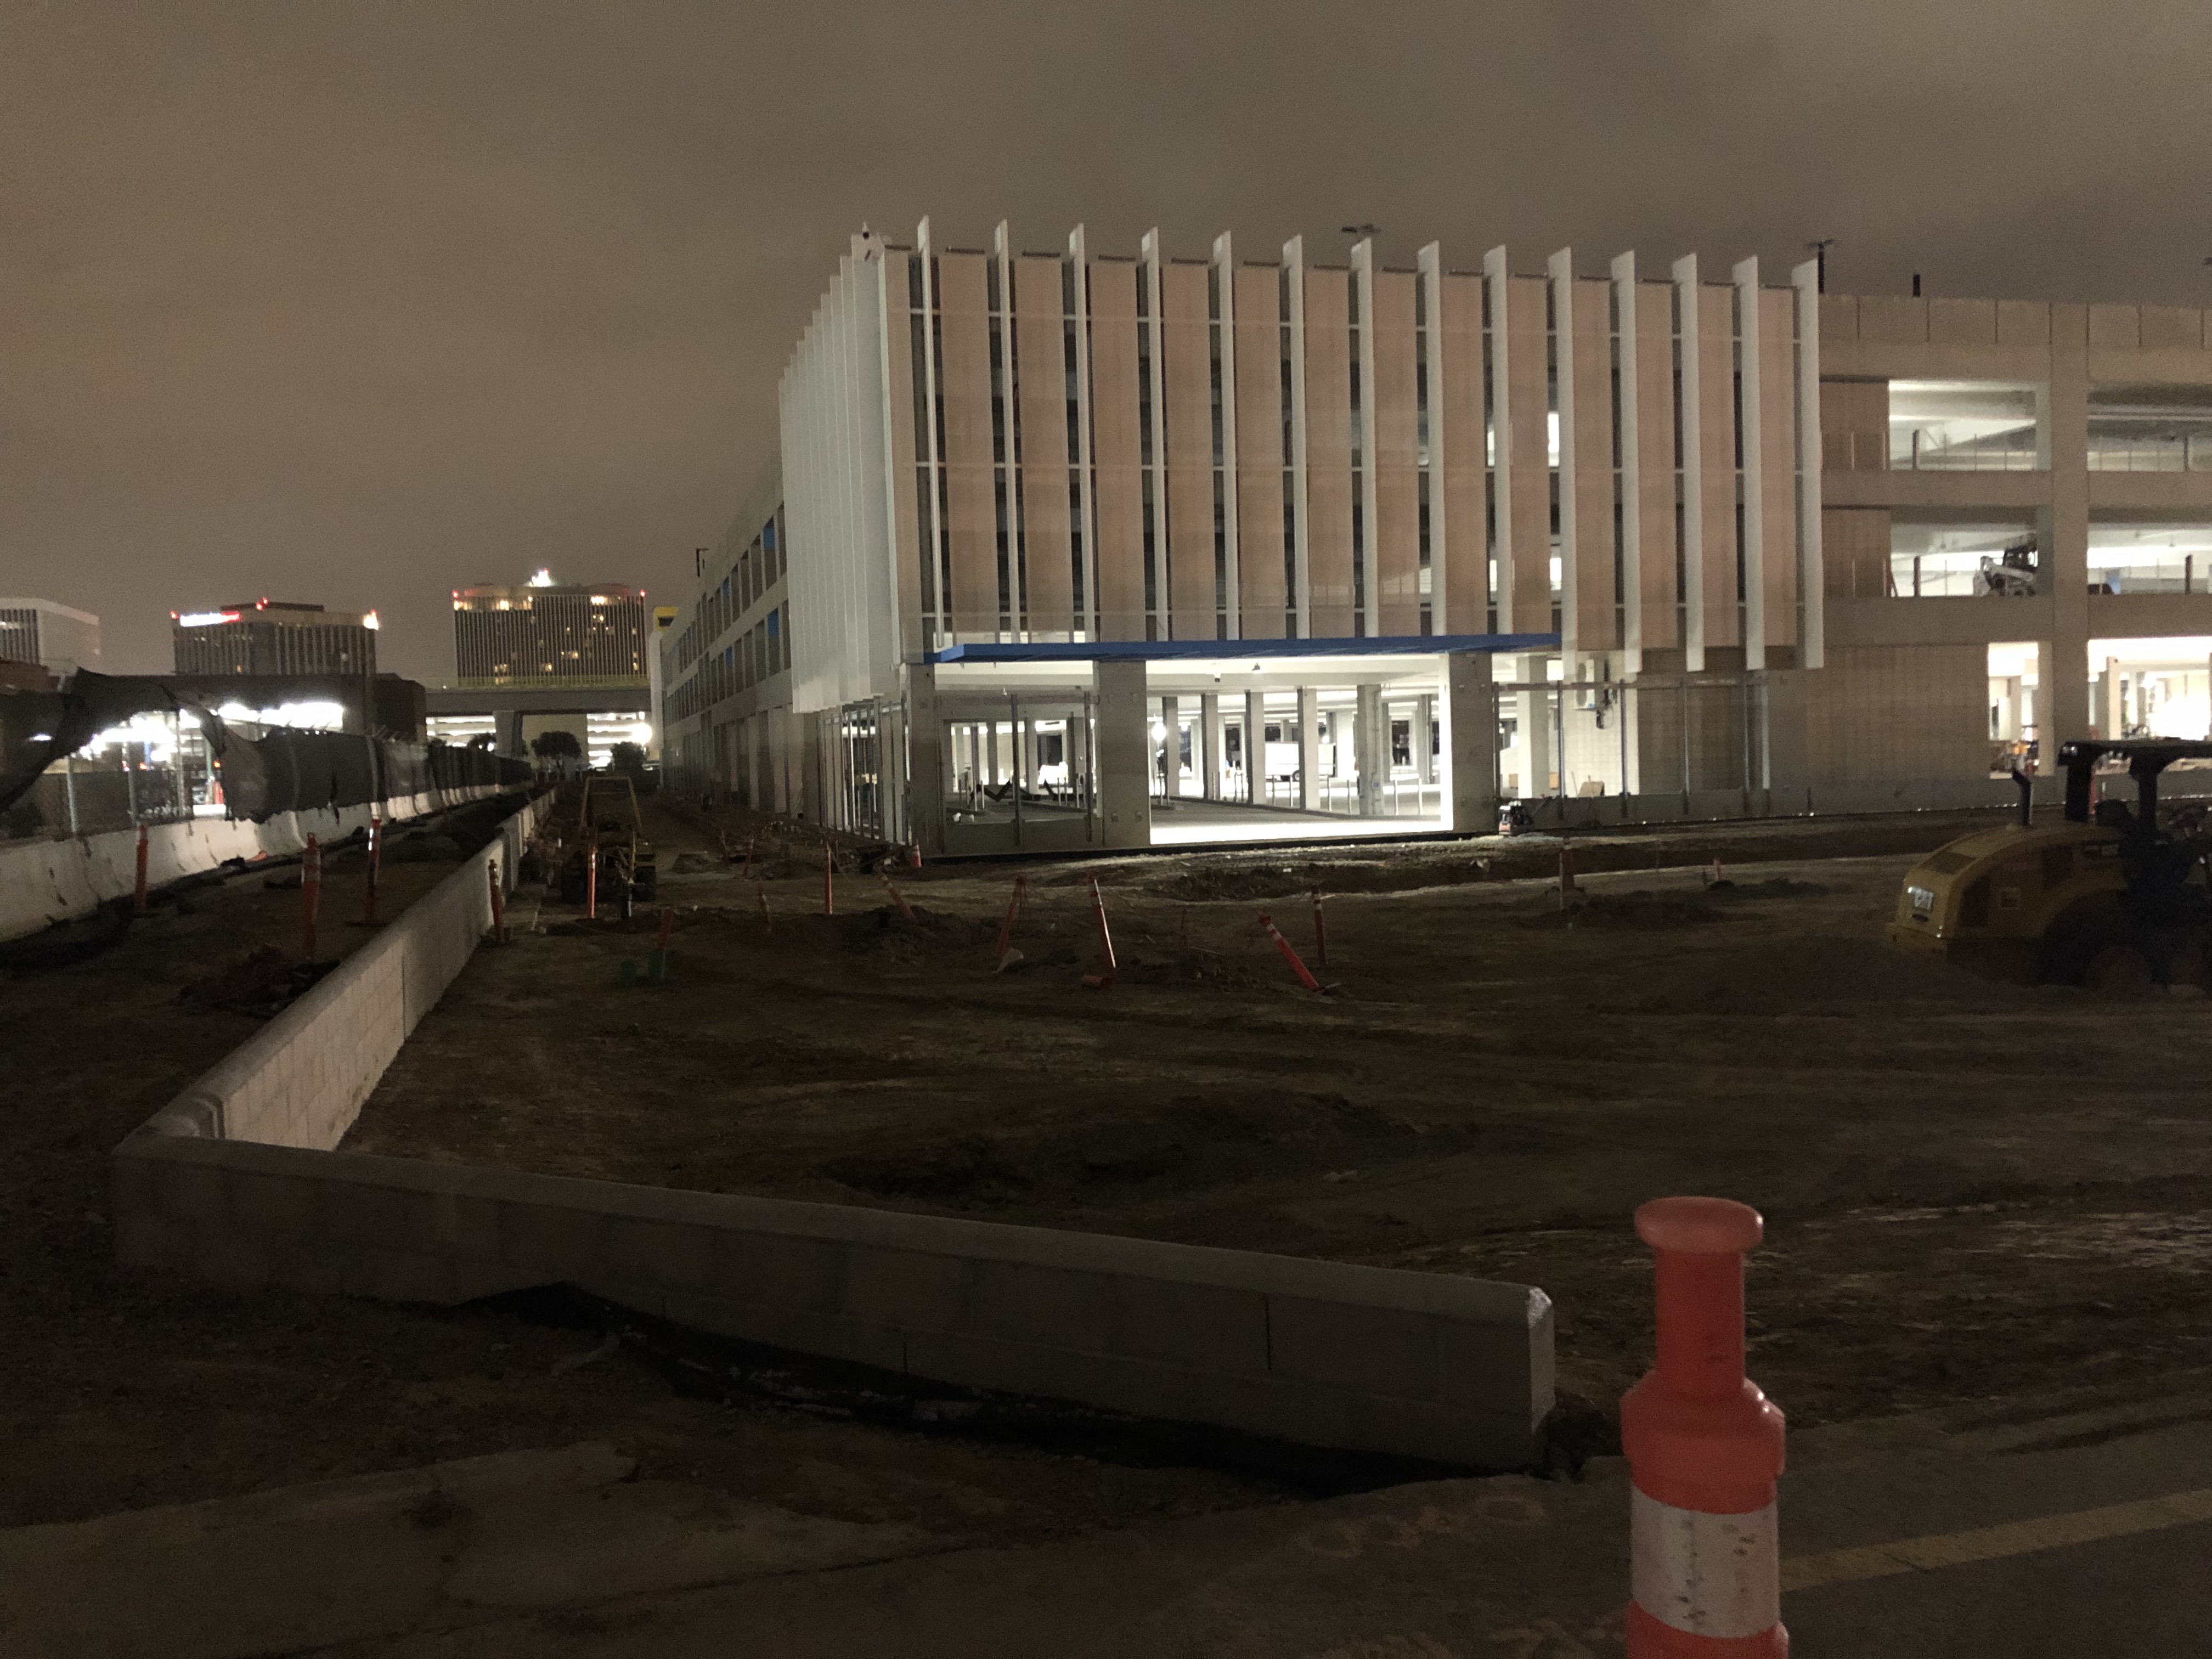 A nighttime view of the northeast corner of the Intermodal Transportation Facility-West where vehicles will exit the structure.